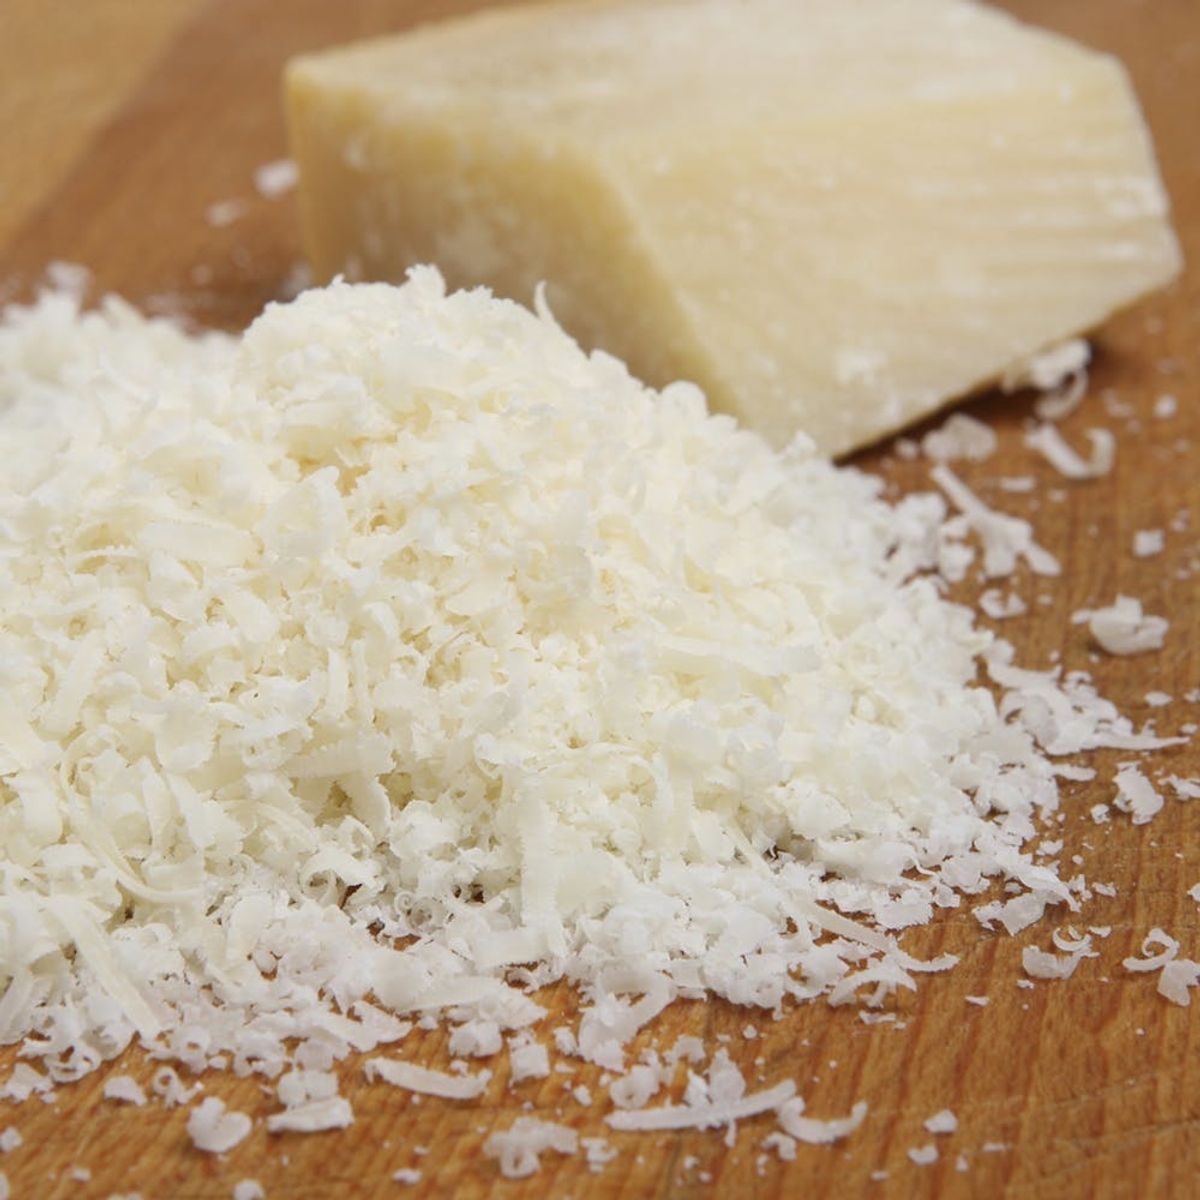 The Parmesan You Sprinkle On Your Pizza Might Actually Be Wood Pulp